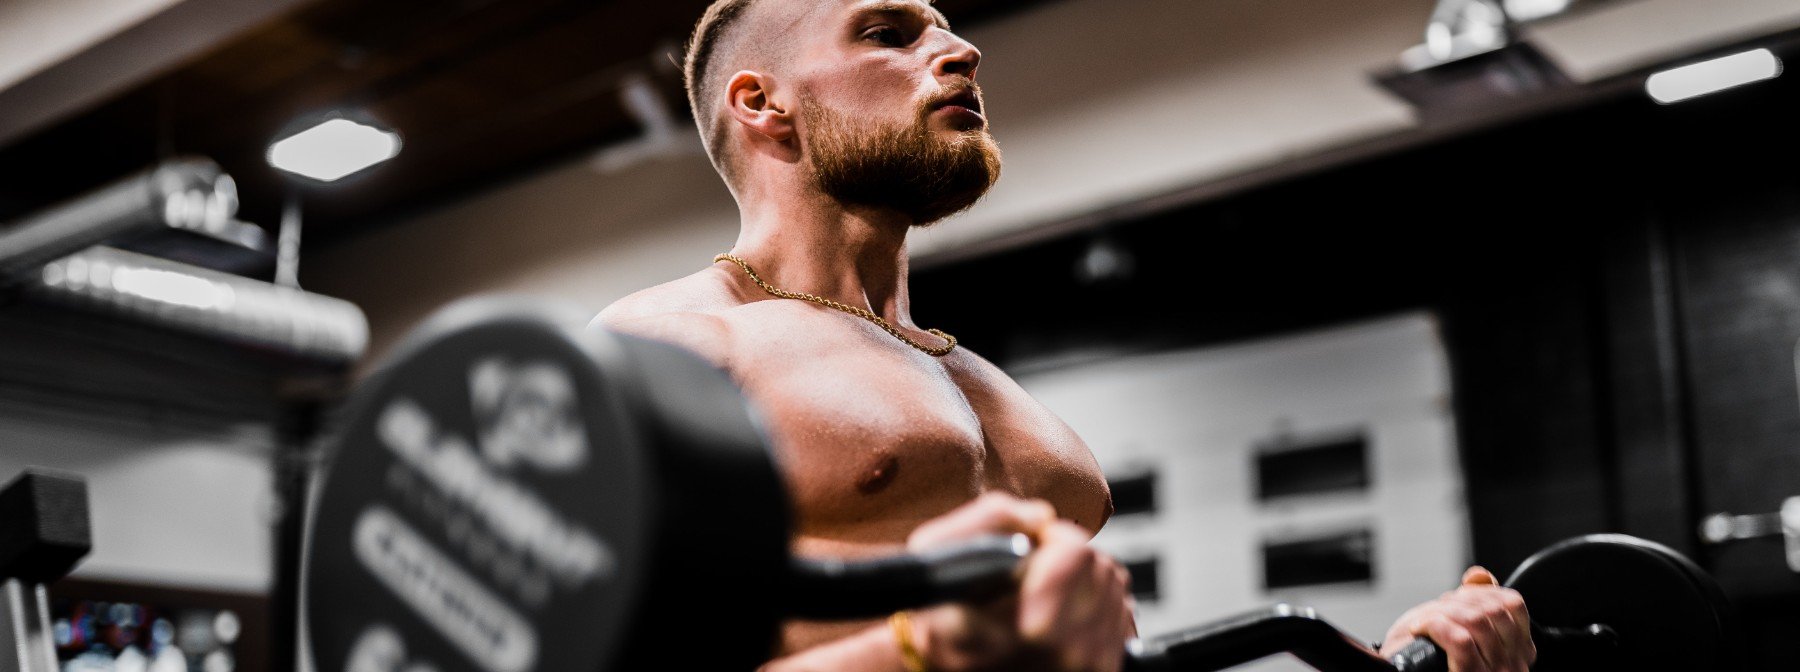 How To Overcome Gym Anxiety: 5 Tips For The Gymtimidation